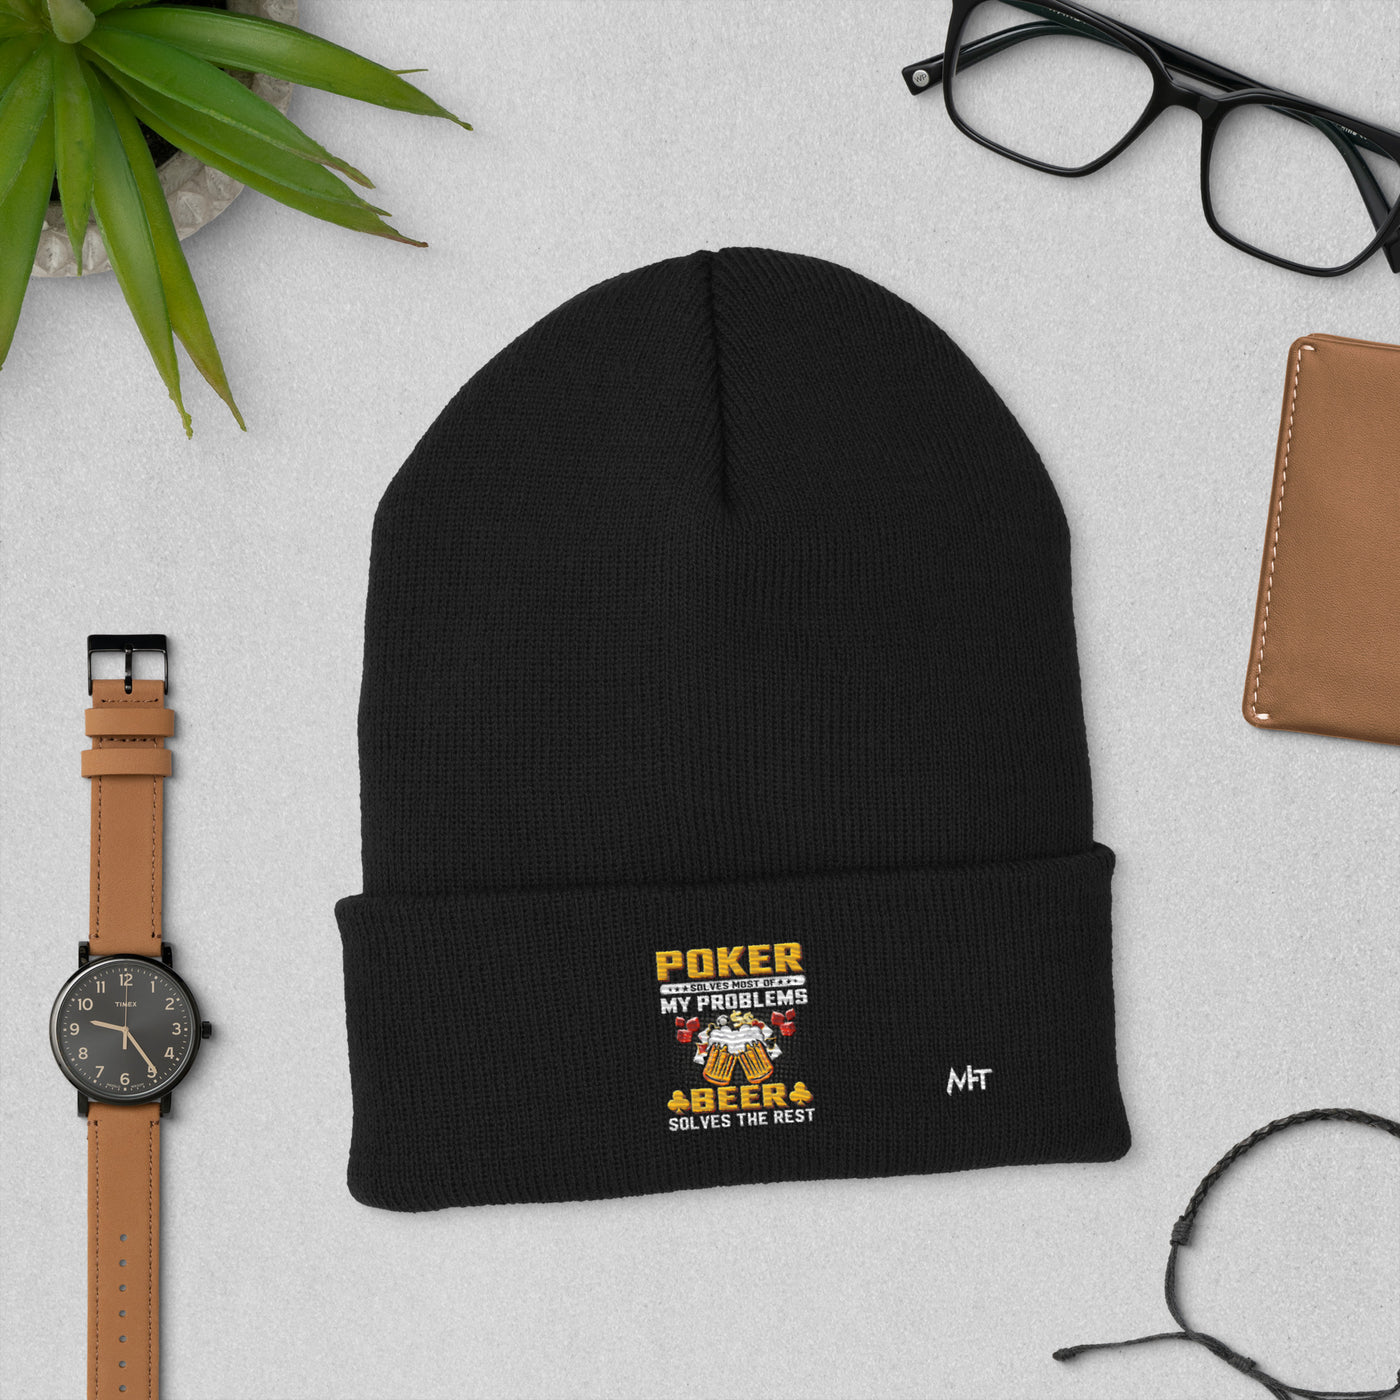 Poker Solves Most of My Problems, but Beer Solves the Rest - Cuffed Beanie